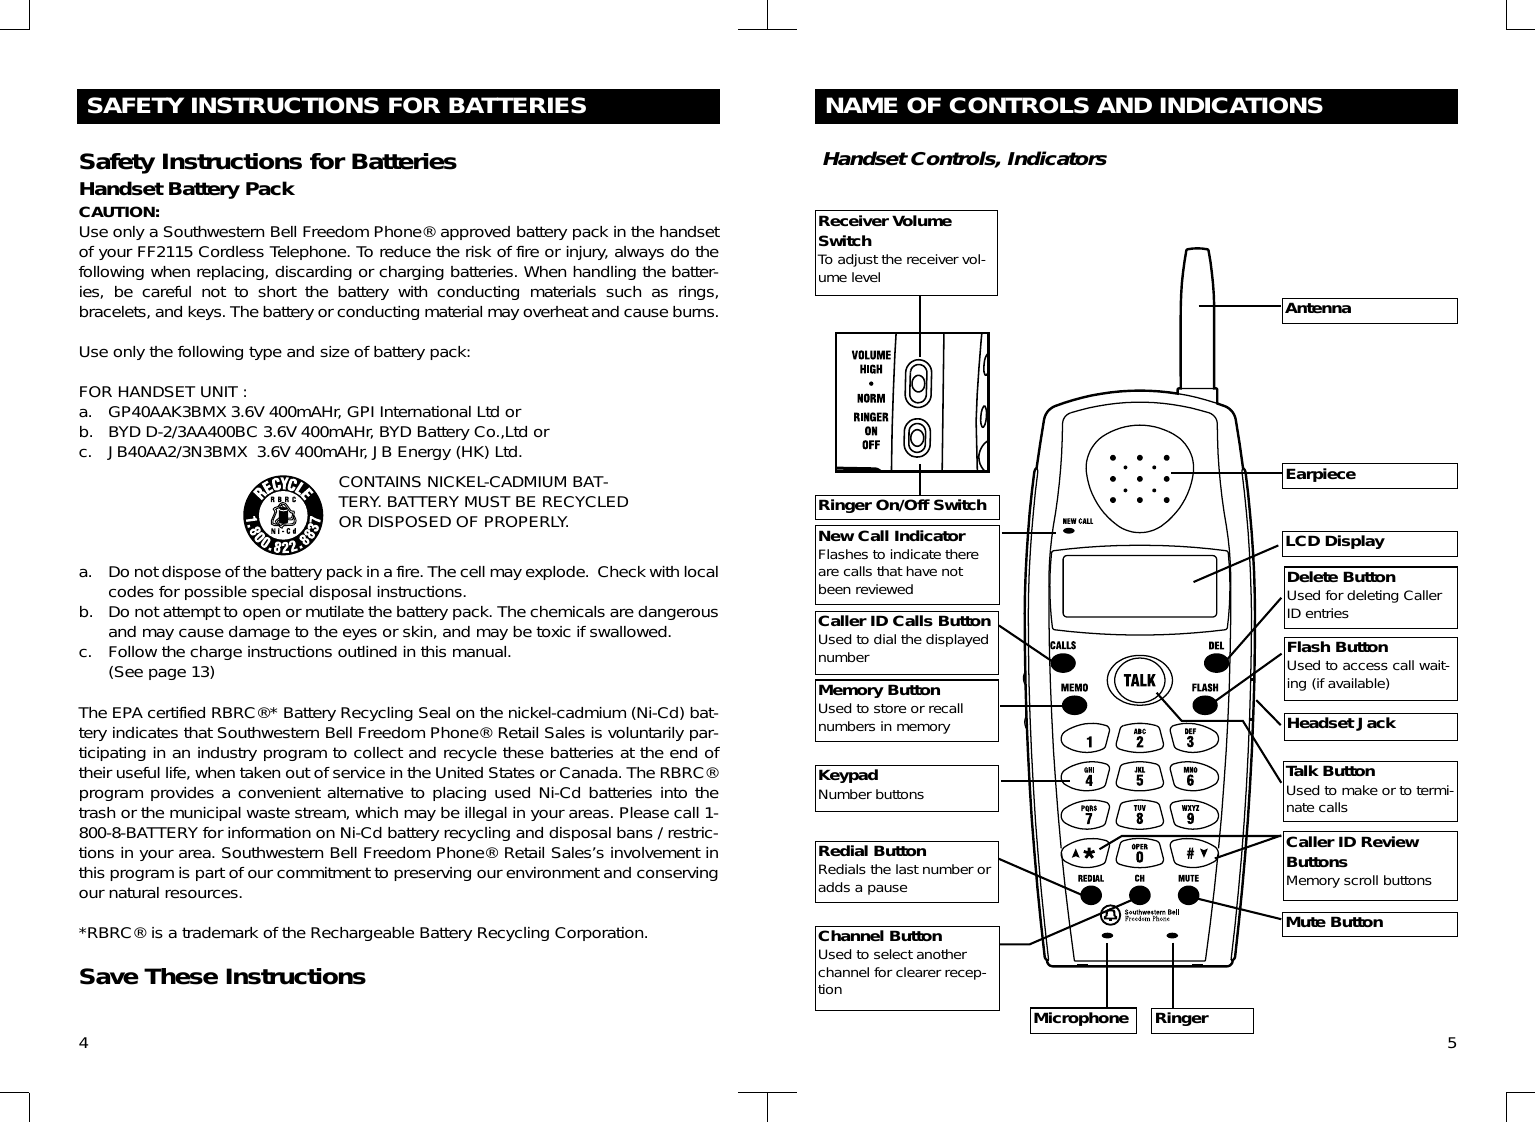 4SAFETY INSTRUCTIONS FOR BATTERIESSafety Instructions for BatteriesHandset Battery PackCAUTION:Use only a Southwestern Bell Freedom Phone® approved battery pack in the handsetof your FF2115 Cordless Telephone. To reduce the risk of fire or injury, always do thefollowing when replacing, discarding or charging batteries. When handling the batter-ies, be careful not to short the battery with conducting materials such as rings,bracelets, and keys. The battery or conducting material may overheat and cause burns.Use only the following type and size of battery pack:FOR HANDSET UNIT :a. GP40AAK3BMX 3.6V 400mAHr, GPI International Ltd orb. BYD D-2/3AA400BC 3.6V 400mAHr, BYD Battery Co.,Ltd orc. JB40AA2/3N3BMX  3.6V 400mAHr, JB Energy (HK) Ltd.a. Do not dispose of the battery pack in a fire. The cell may explode.  Check with localcodes for possible special disposal instructions.b. Do not attempt to open or mutilate the battery pack. The chemicals are dangerousand may cause damage to the eyes or skin, and may be toxic if swallowed.c. Follow the charge instructions outlined in this manual.(See page 13)The EPA certified RBRC®* Battery Recycling Seal on the nickel-cadmium (Ni-Cd) bat-tery indicates that Southwestern Bell Freedom Phone® Retail Sales is voluntarily par-ticipating in an industry program to collect and recycle these batteries at the end oftheir useful life, when taken out of service in the United States or Canada. The RBRC®program provides a convenient alternative to placing used Ni-Cd batteries into thetrash or the municipal waste stream, which may be illegal in your areas. Please call 1-800-8-BATTERY for information on Ni-Cd battery recycling and disposal bans / restric-tions in your area. Southwestern Bell Freedom Phone® Retail Sales’s involvement inthis program is part of our commitment to preserving our environment and conservingour natural resources.*RBRC® is a trademark of the Rechargeable Battery Recycling Corporation.Save These InstructionsCONTAINS NICKEL-CADMIUM BAT-TERY. BATTERY MUST BE RECYCLEDOR DISPOSED OF PROPERLY.5NAME OF CONTROLS AND INDICATIONSHandset Controls, IndicatorsAntennaEarpieceLCD DisplayNew Call IndicatorFlashes to indicate thereare calls that have notbeen reviewedMemory ButtonUsed to store or recallnumbers in memoryDelete ButtonUsed for deleting CallerID entriesRedial ButtonRedials the last number oradds a pauseFlash ButtonUsed to access call wait-ing (if available)MicrophoneReceiver VolumeSwitchTo adjust the receiver vol-ume levelRinger On/Off SwitchCaller ID ReviewButtonsMemory scroll buttonsCaller ID Calls ButtonUsed to dial the displayednumberTalk ButtonUsed to make or to termi-nate callsKeypadNumber buttonsChannel ButtonUsed to select anotherchannel for clearer recep-tionMute ButtonRingerHeadset Jack